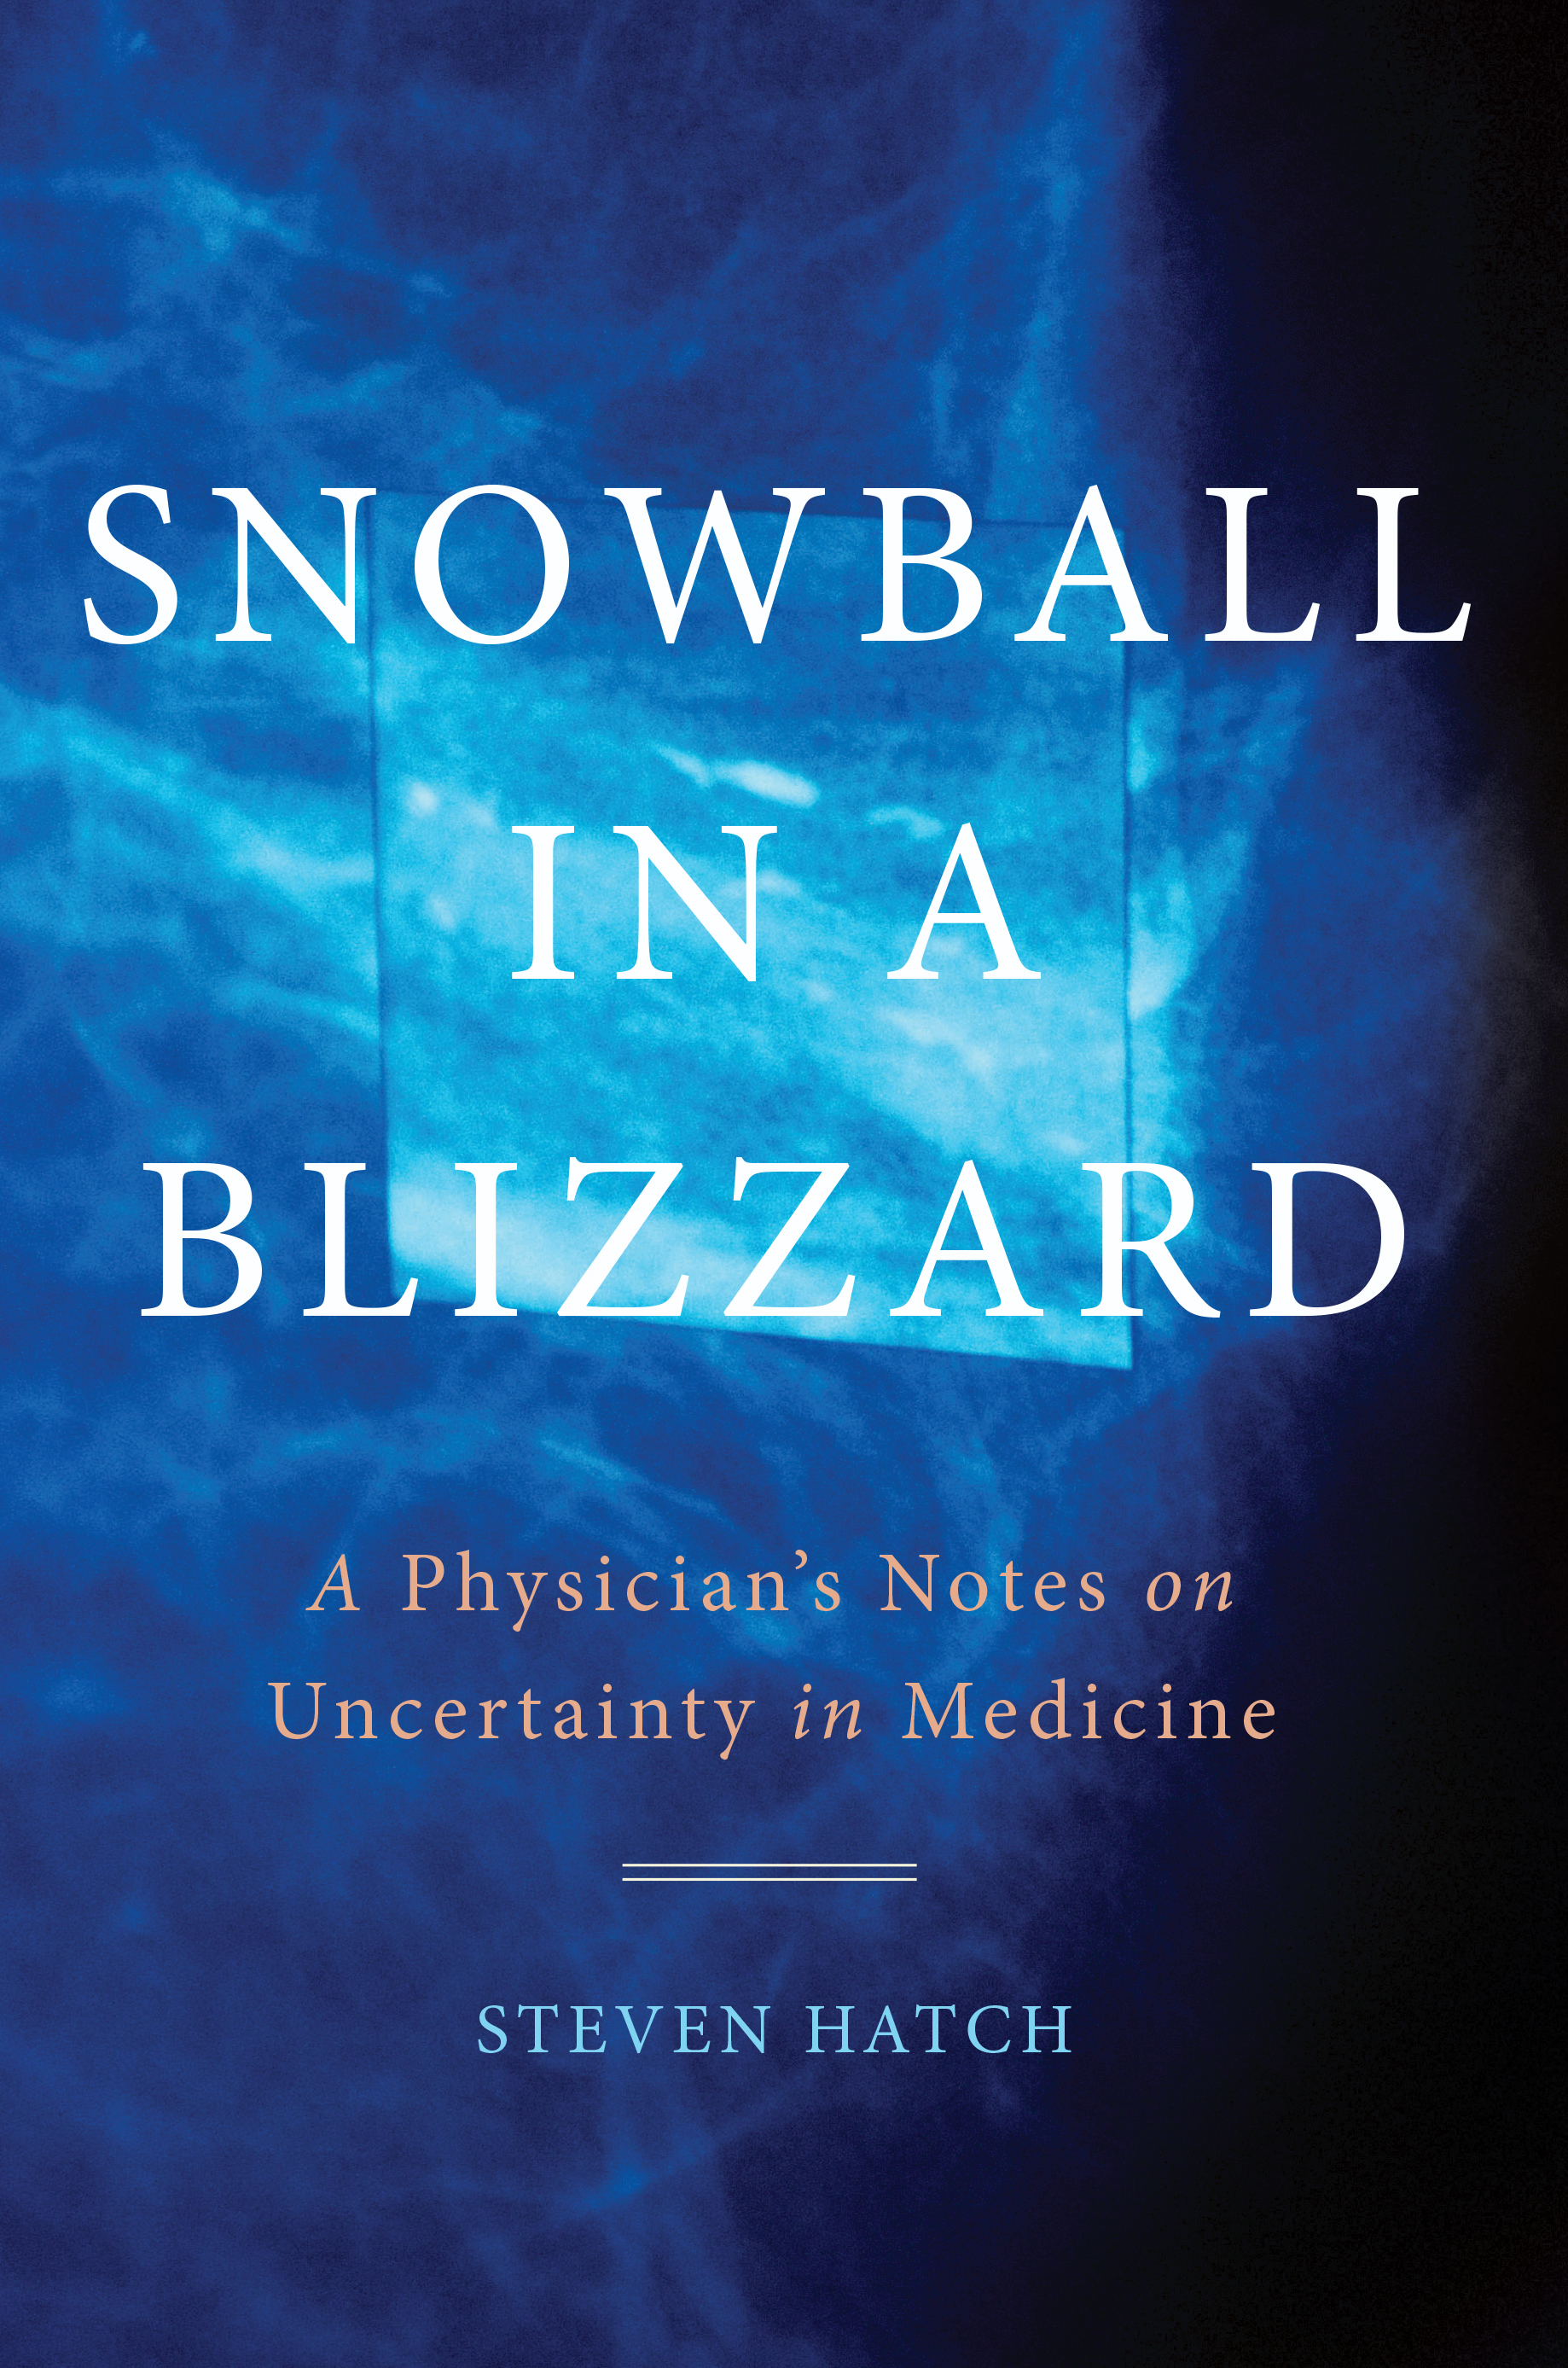 Image de couverture de Snowball in a Blizzard [electronic resource] : A Physician's Notes on Uncertainty in Medicine